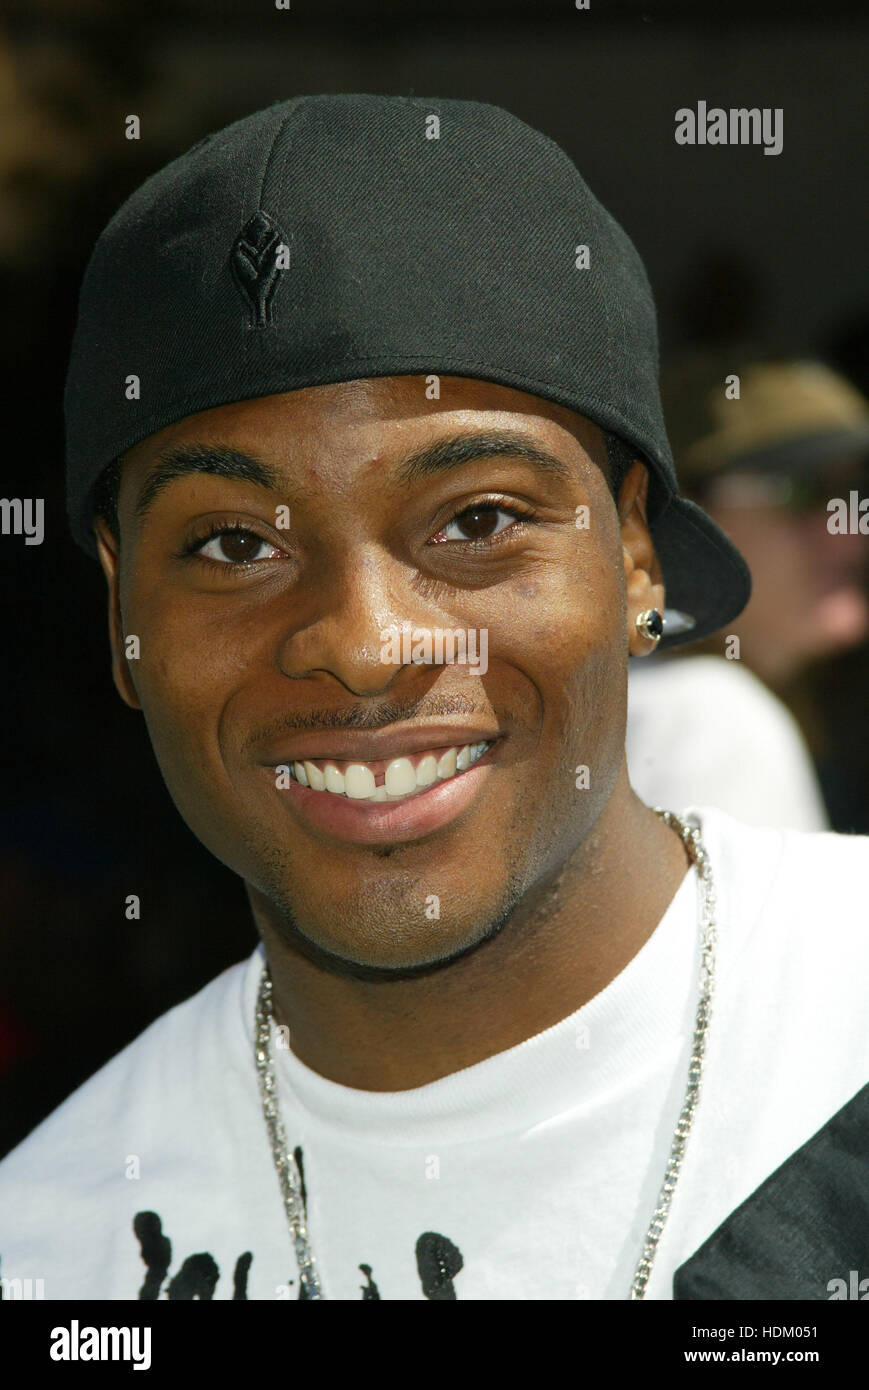 Actor Kel Mitchell at the premiere for the  film, 'Yu-Gi-Oh! The Movie'  in Los Angeles on August 7, 2004. The animated film will be released in the US on August 13th by Warner Bros. Pitctues. Photo by Francis Specker Stock Photo